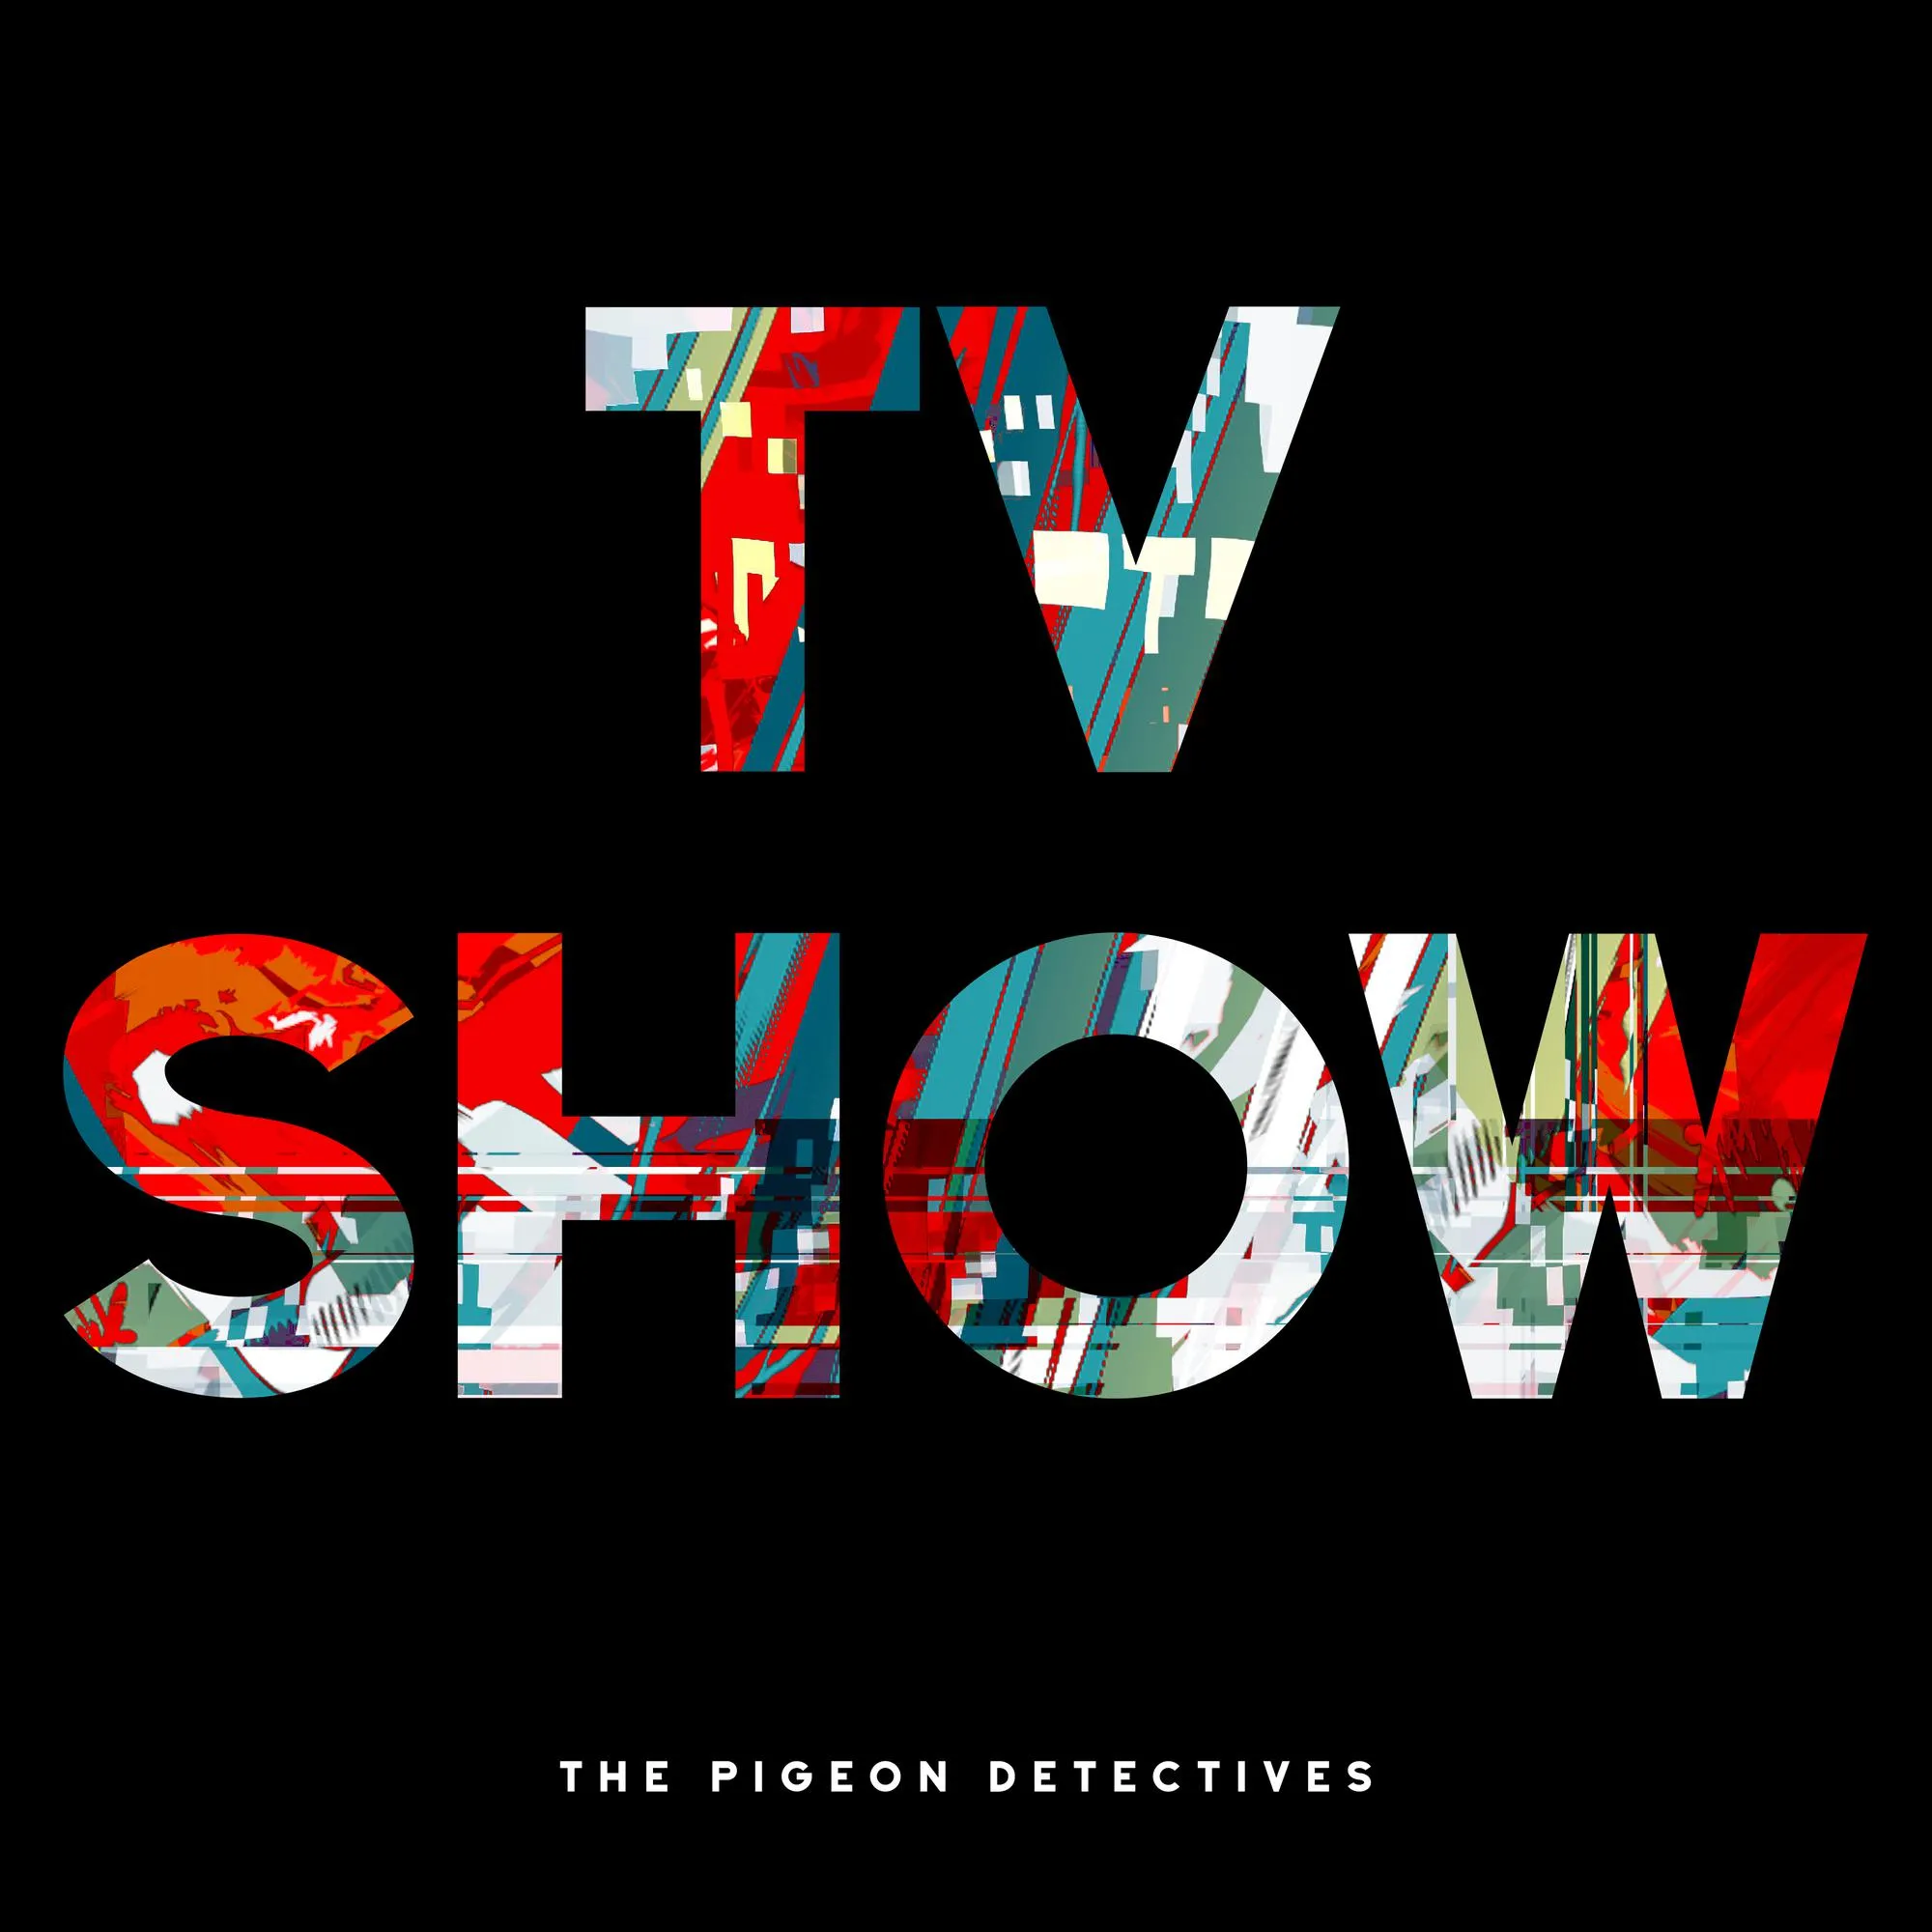 <strong>The Pigeon Detectives - TV Show</strong> (Vinyl LP - black)